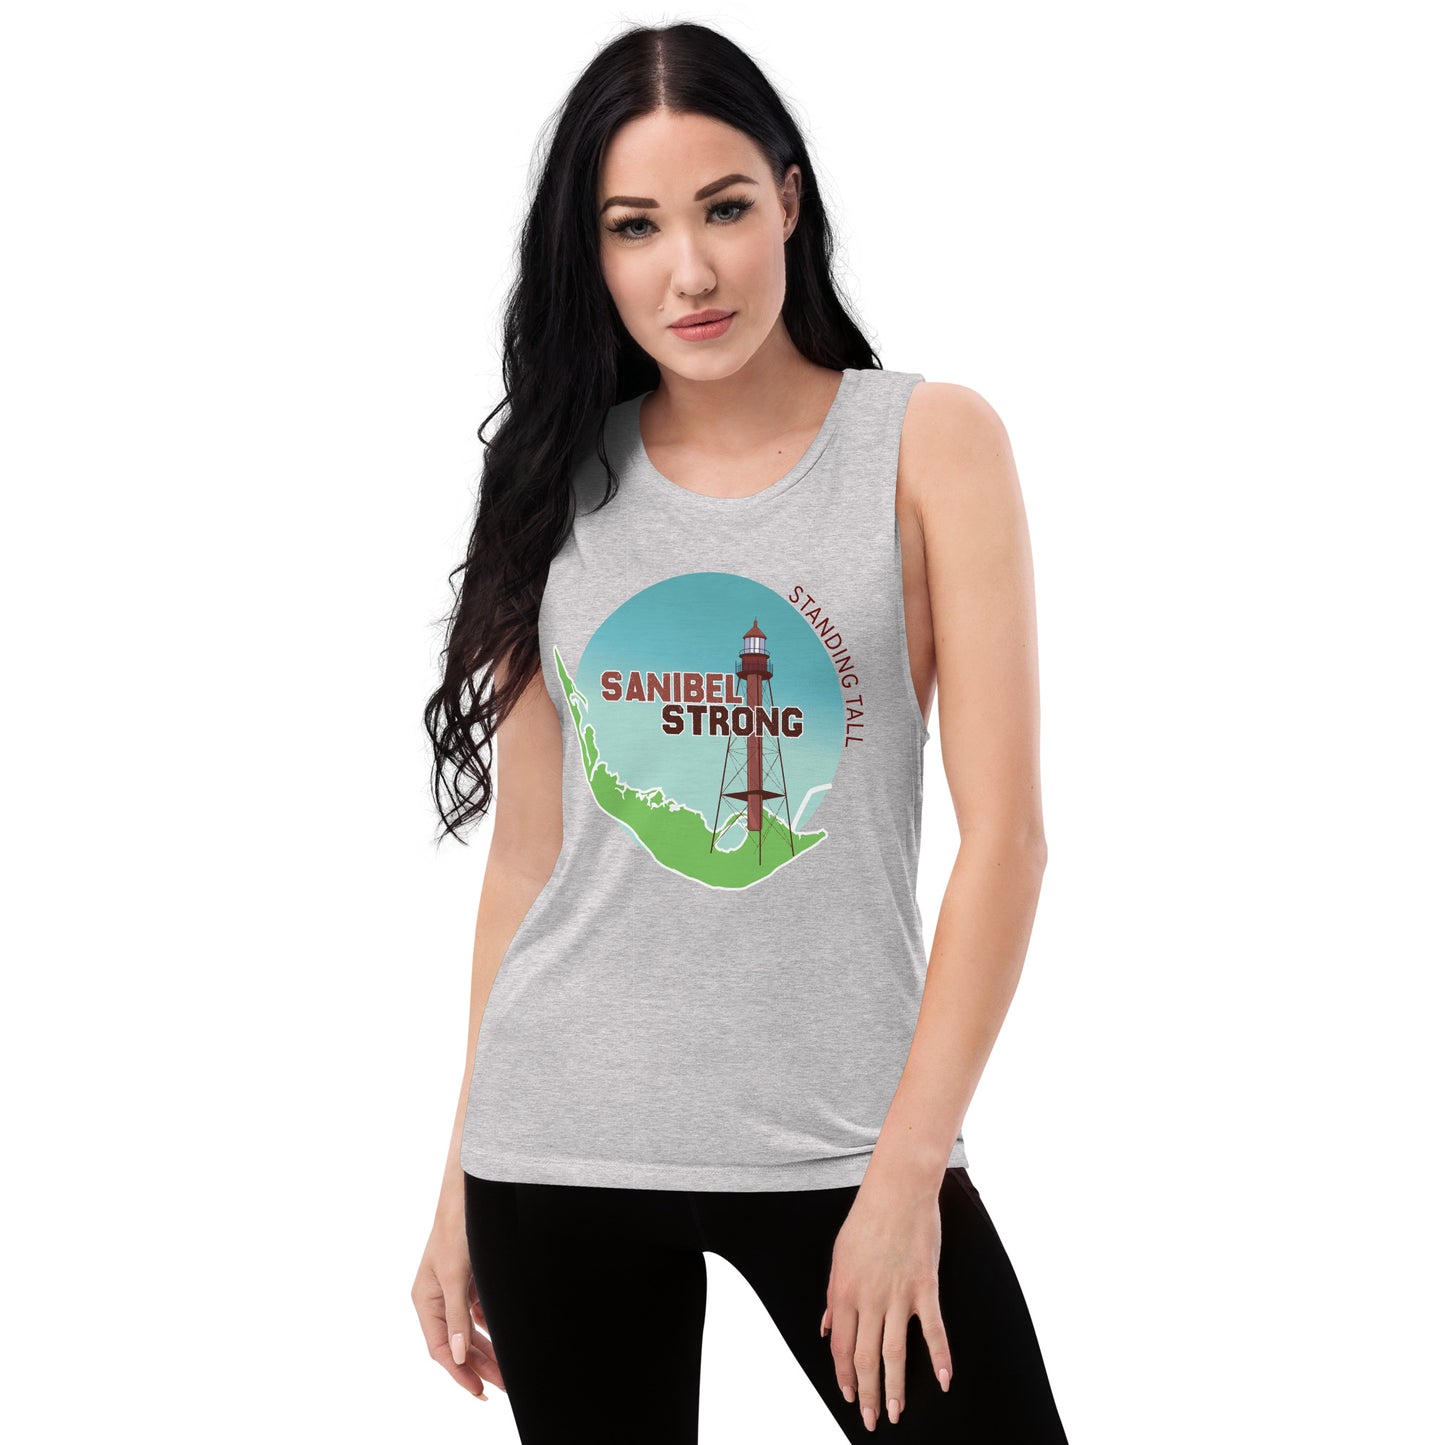 Sanibel Strong Standing Tall Ladies' Muscle Tank